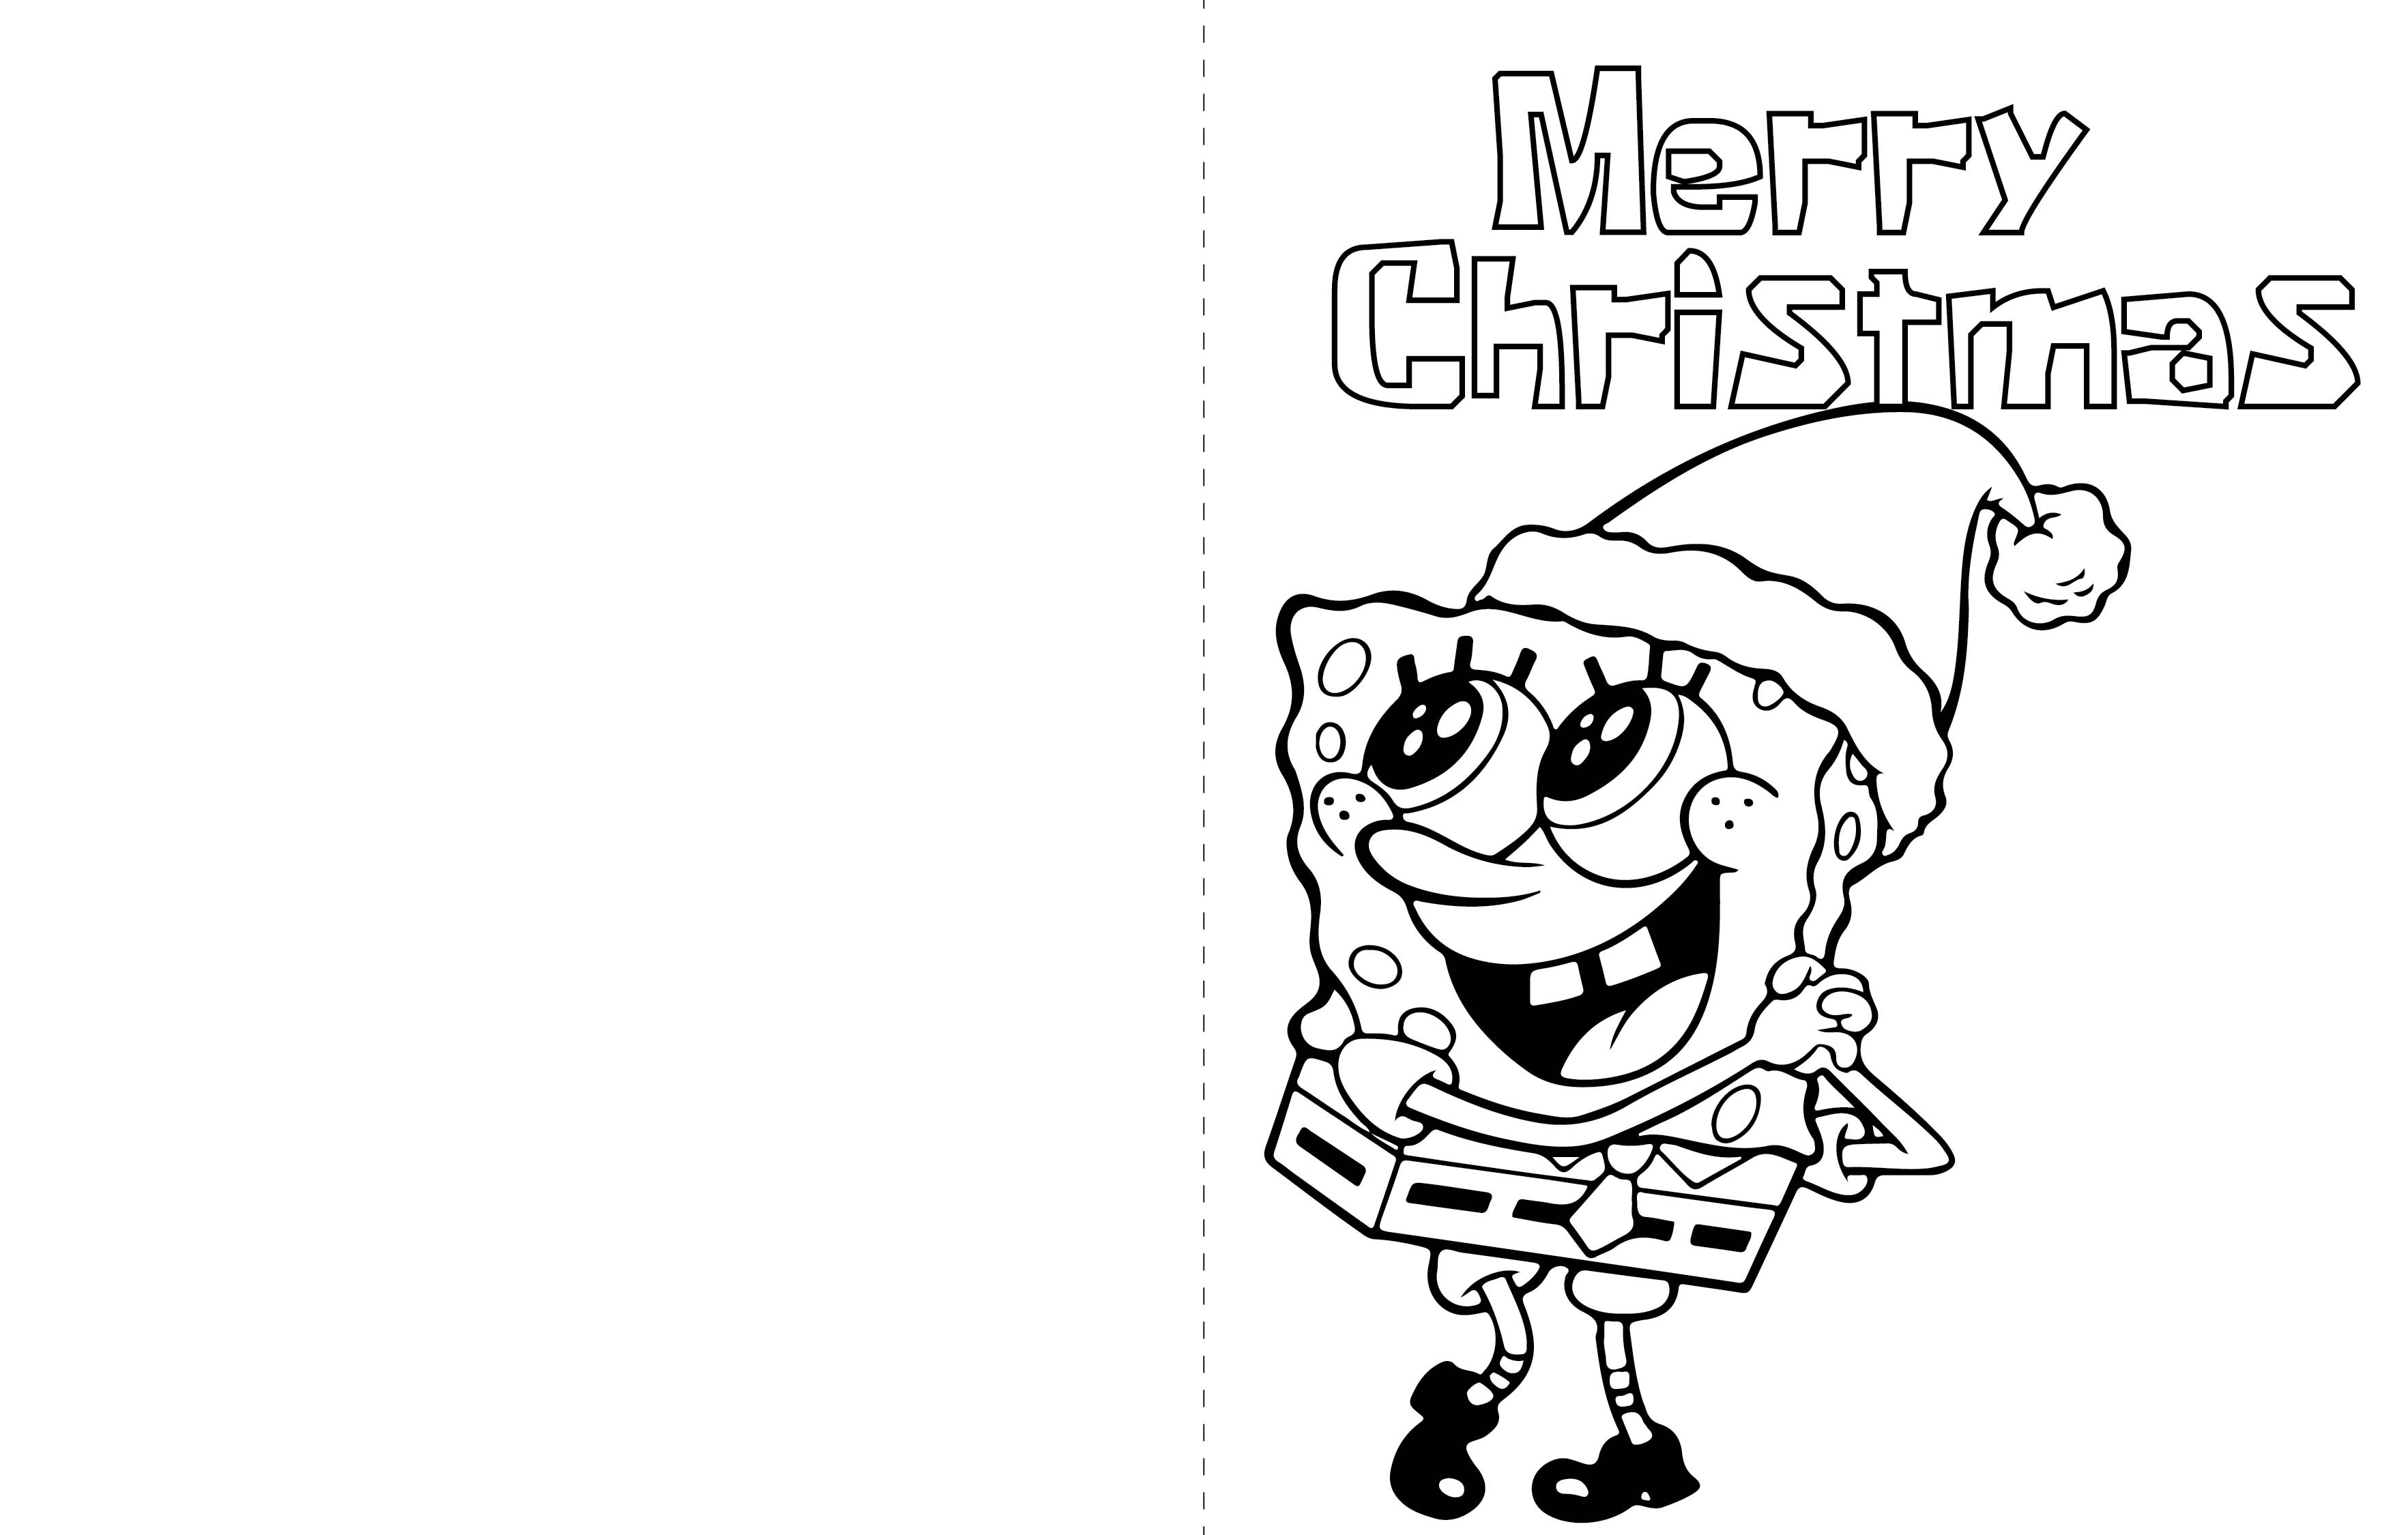 christmas card colouring templates free download